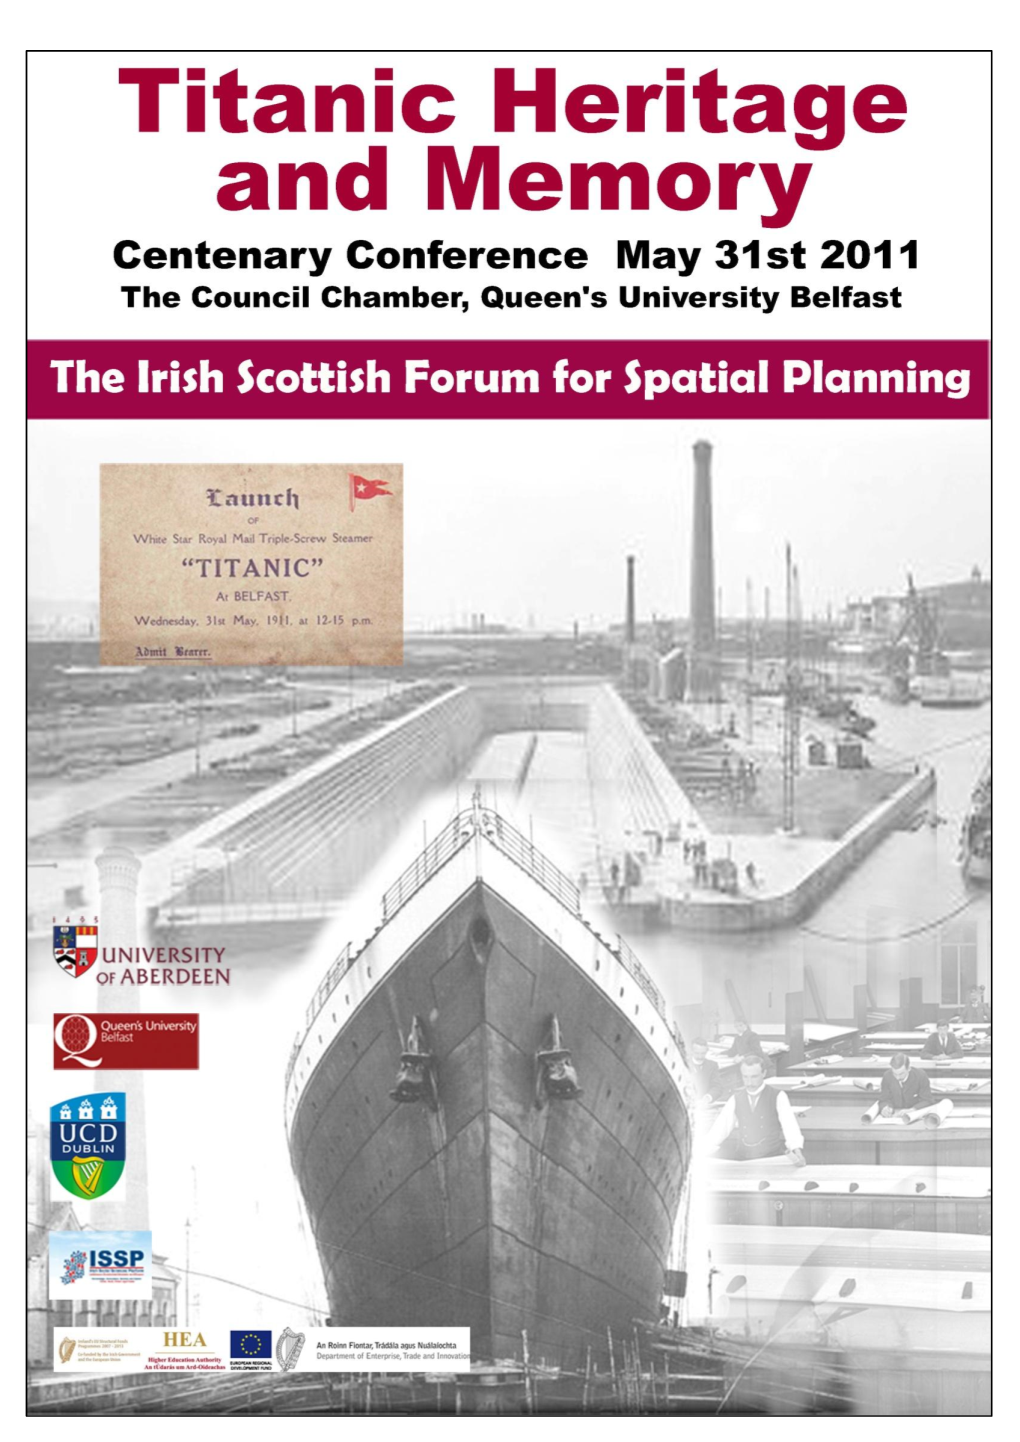 IRISH SCOTTISH FORUM for SPATIAL PLANNING Titanic Heritage and Memory, Centenary Conference the Council Chamber, Queen’S University Belfast 31St May 2011